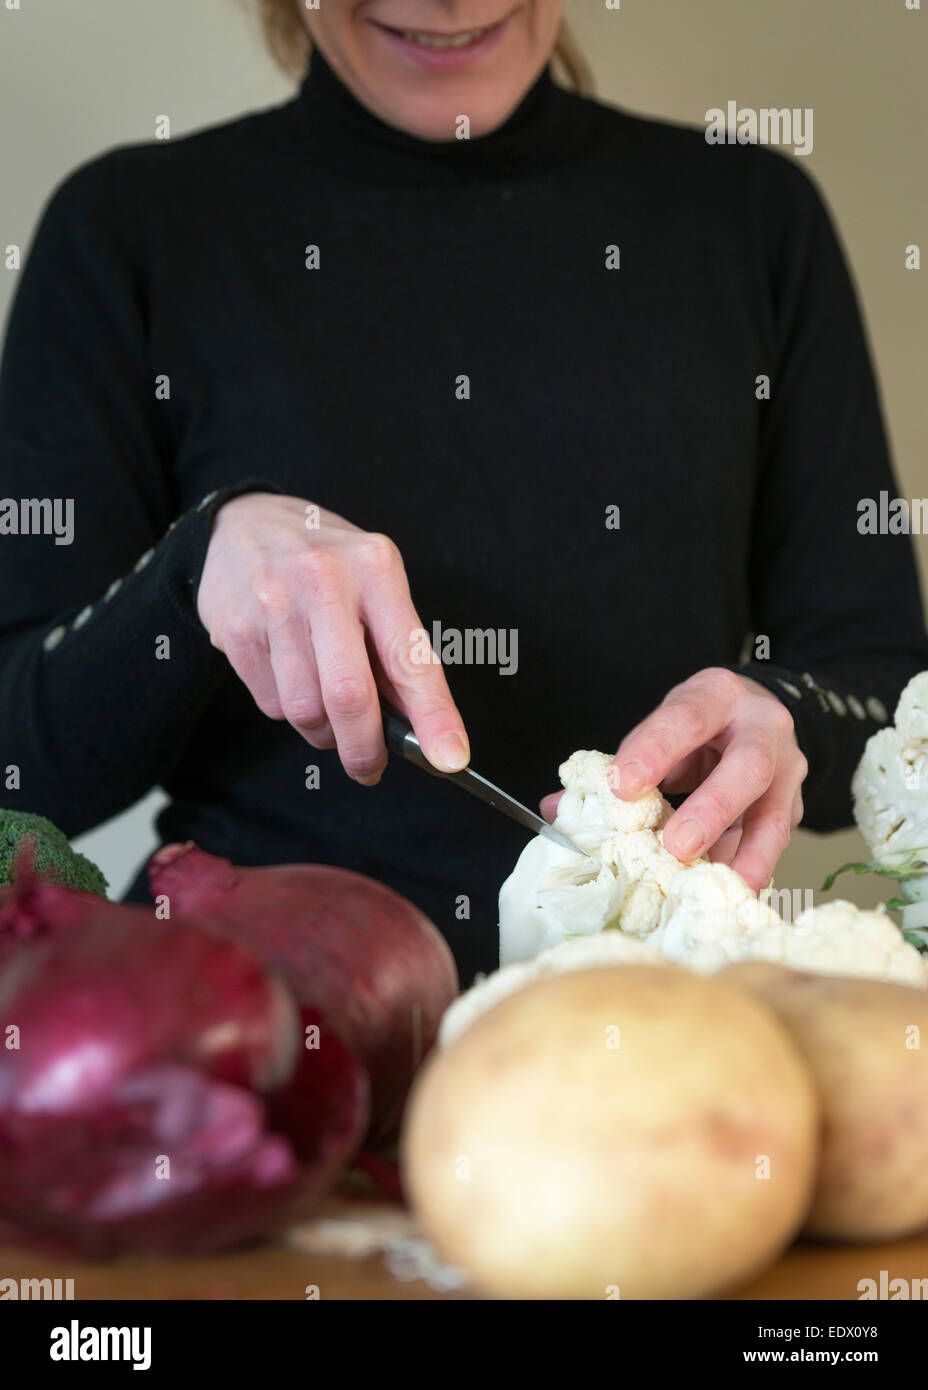 A womans hands slicing vegetables for a recipe. Stock Photo